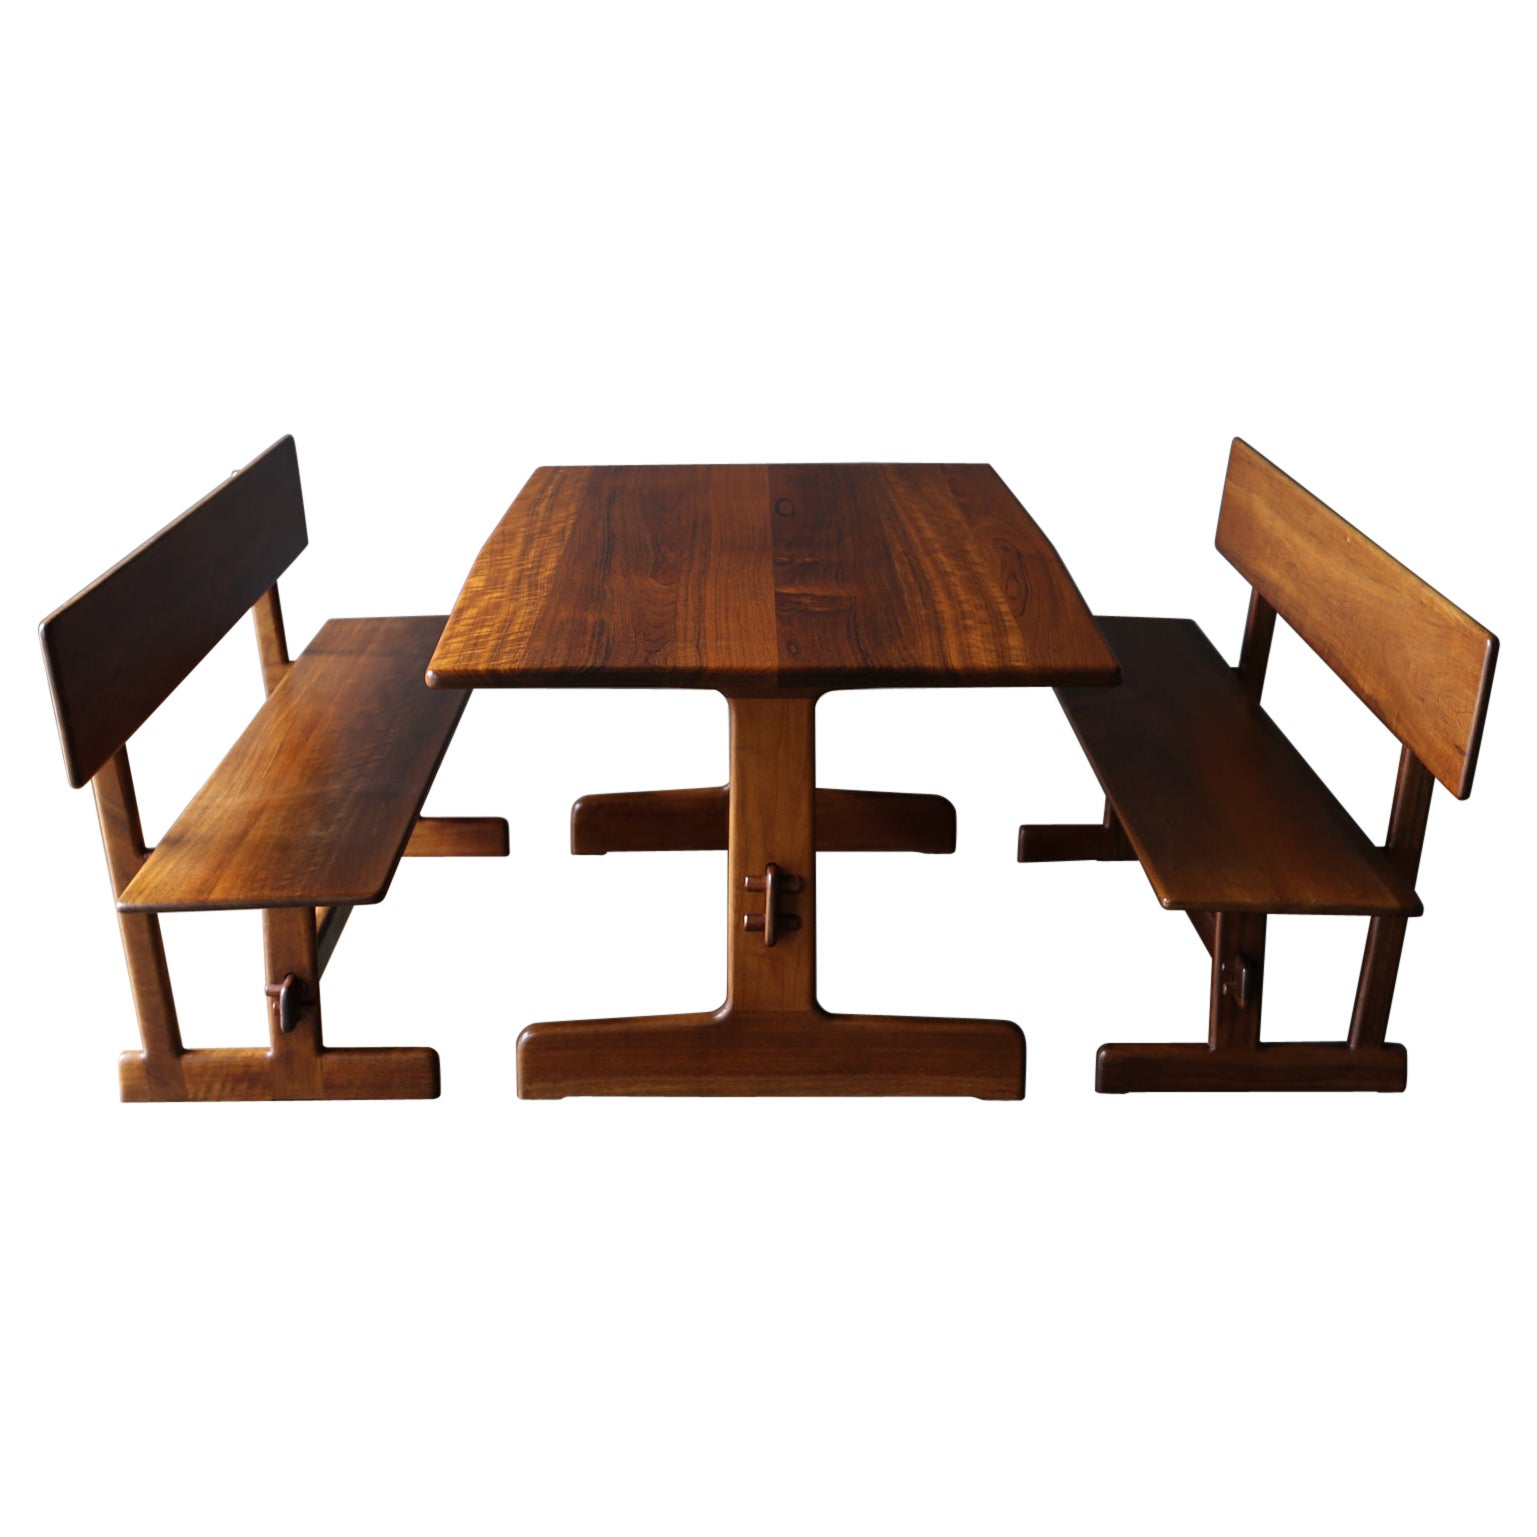 Gerald McCabe Shedua Trestle Dining Table & Benches, c.1980